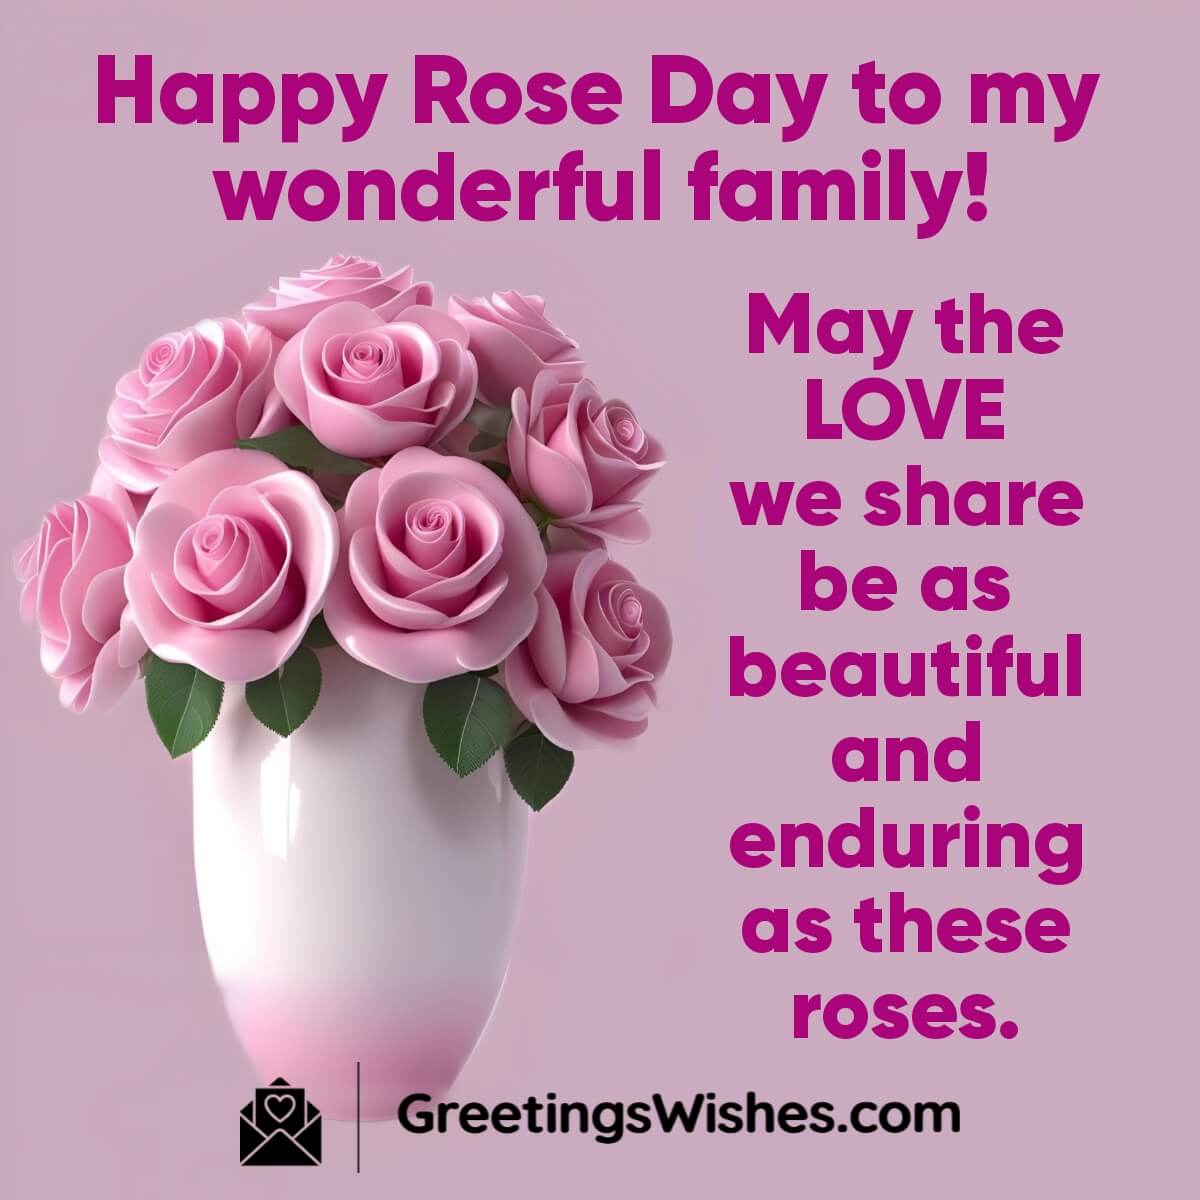 Rose Day Wishes For Family